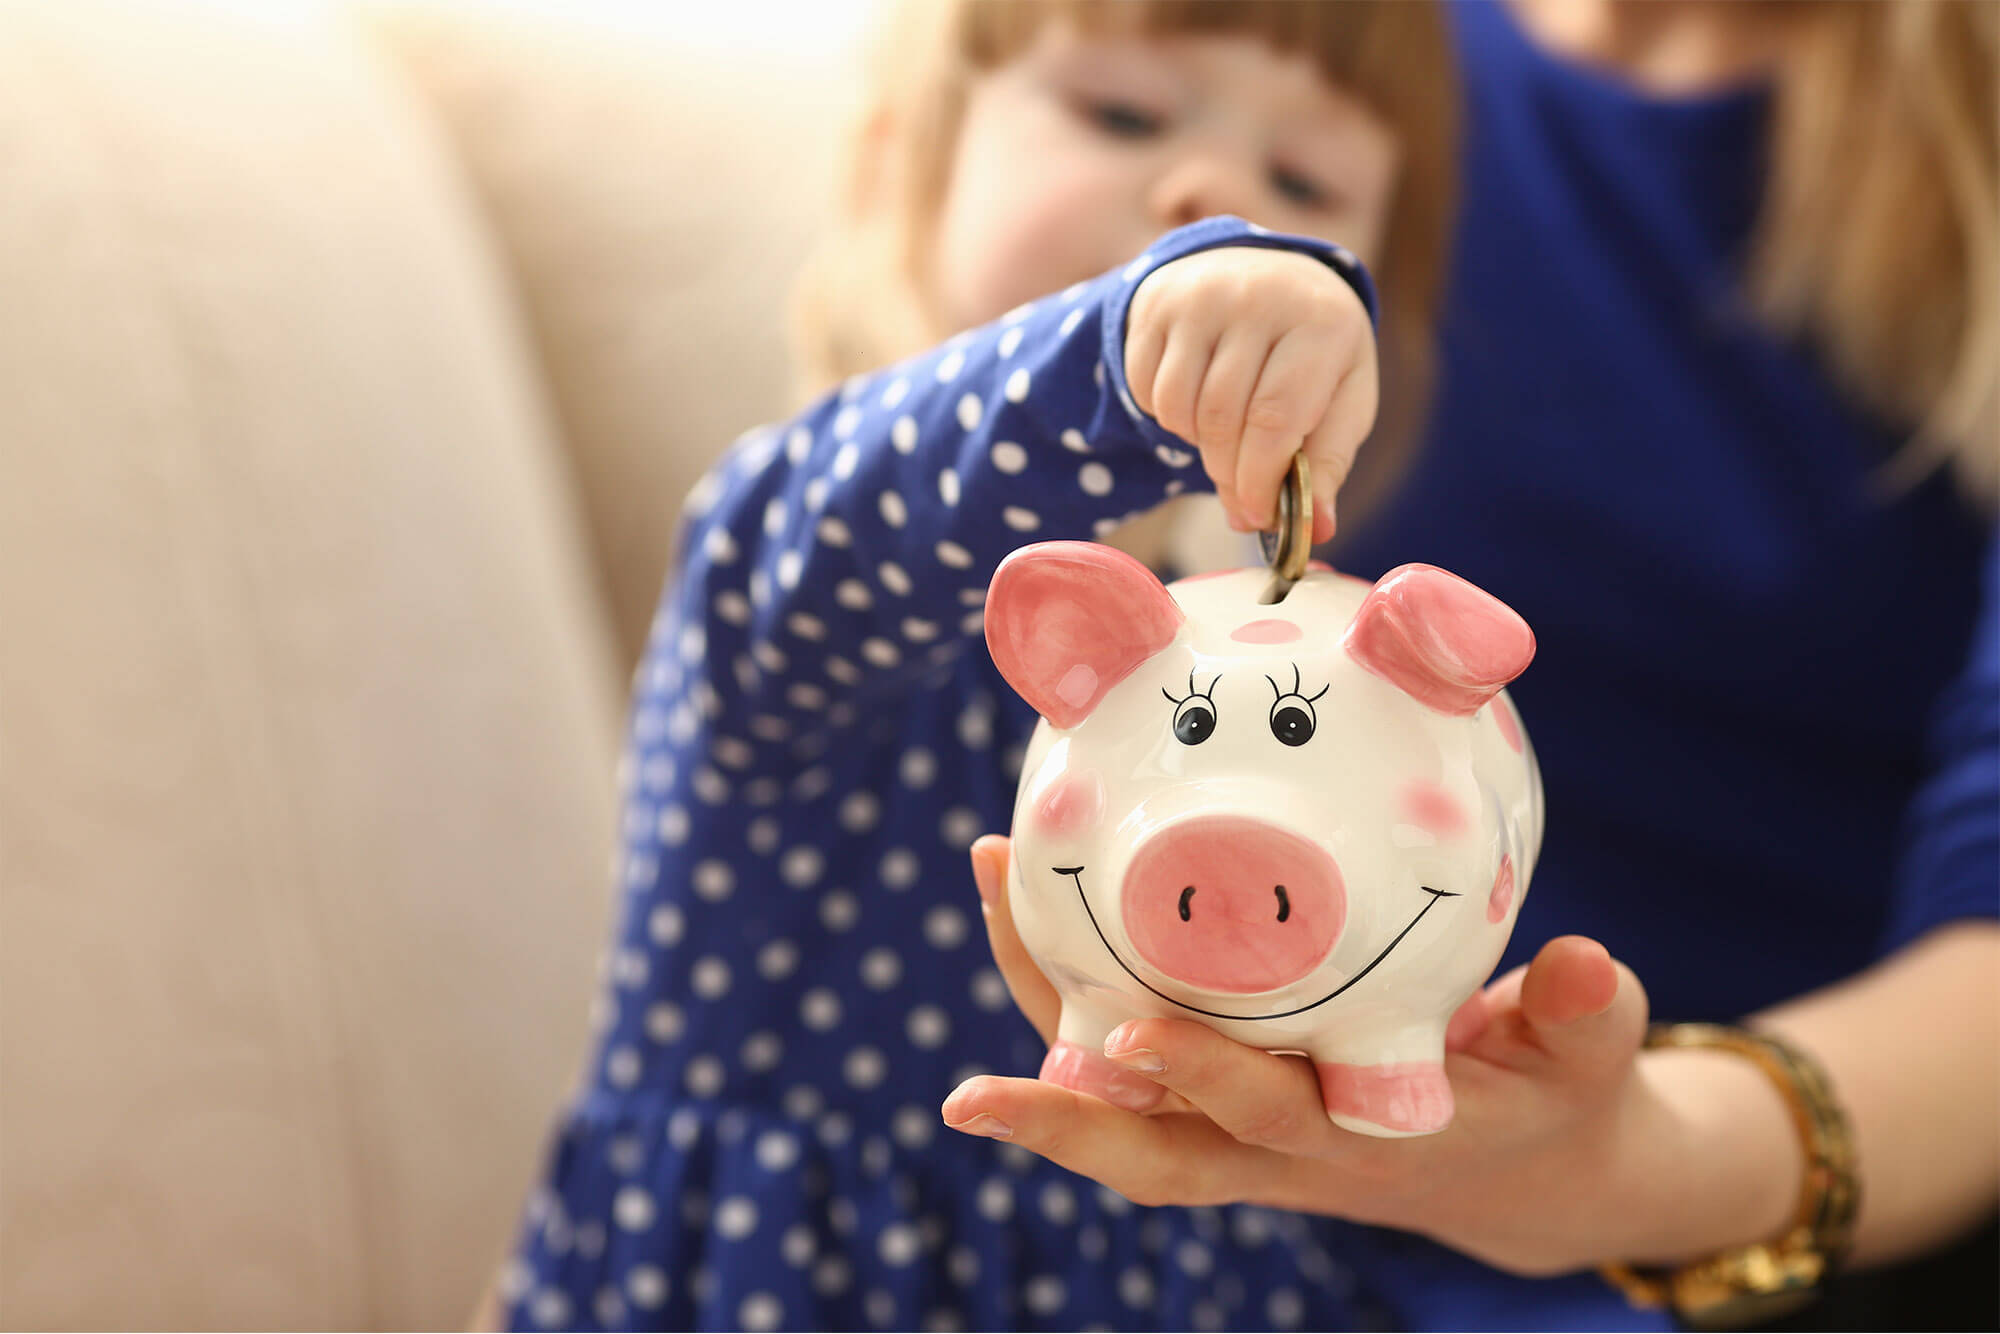 Young girl placing coins in piggy bank held by mother